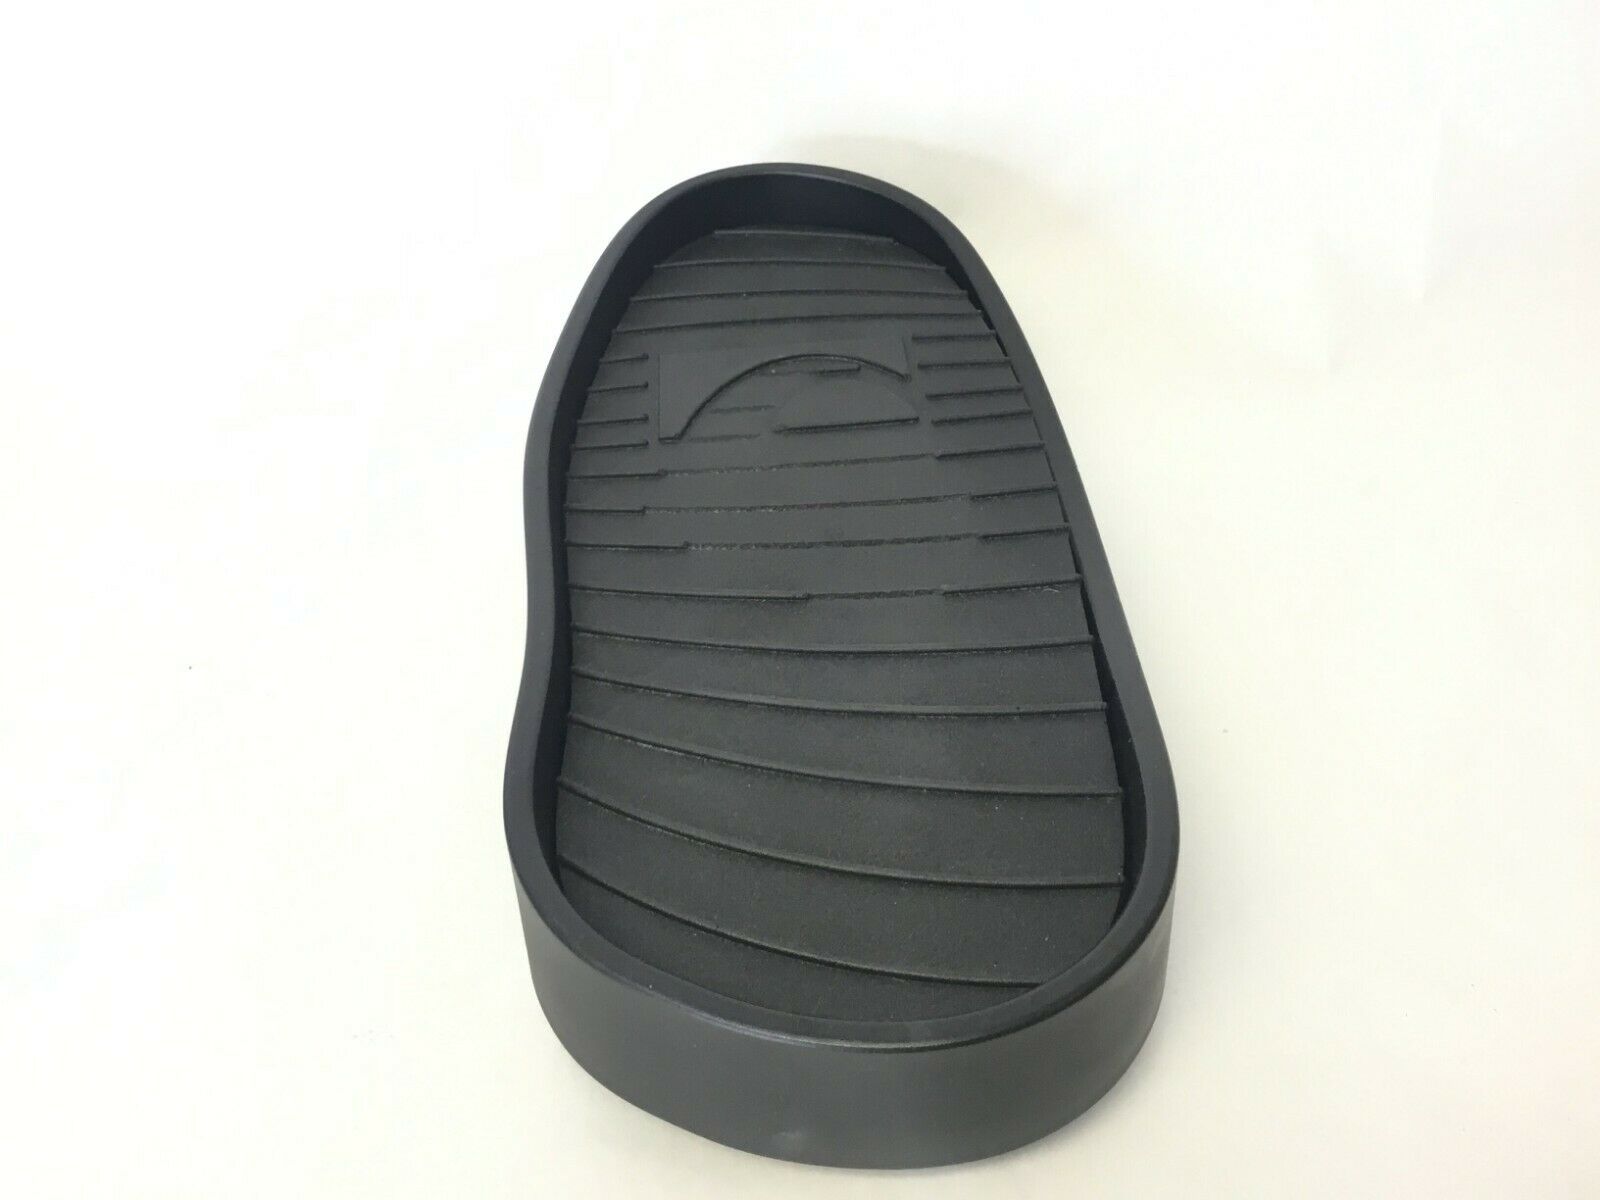 True Fitness Z5.1 Elliptical Right Foot Pedal Pad (Used)